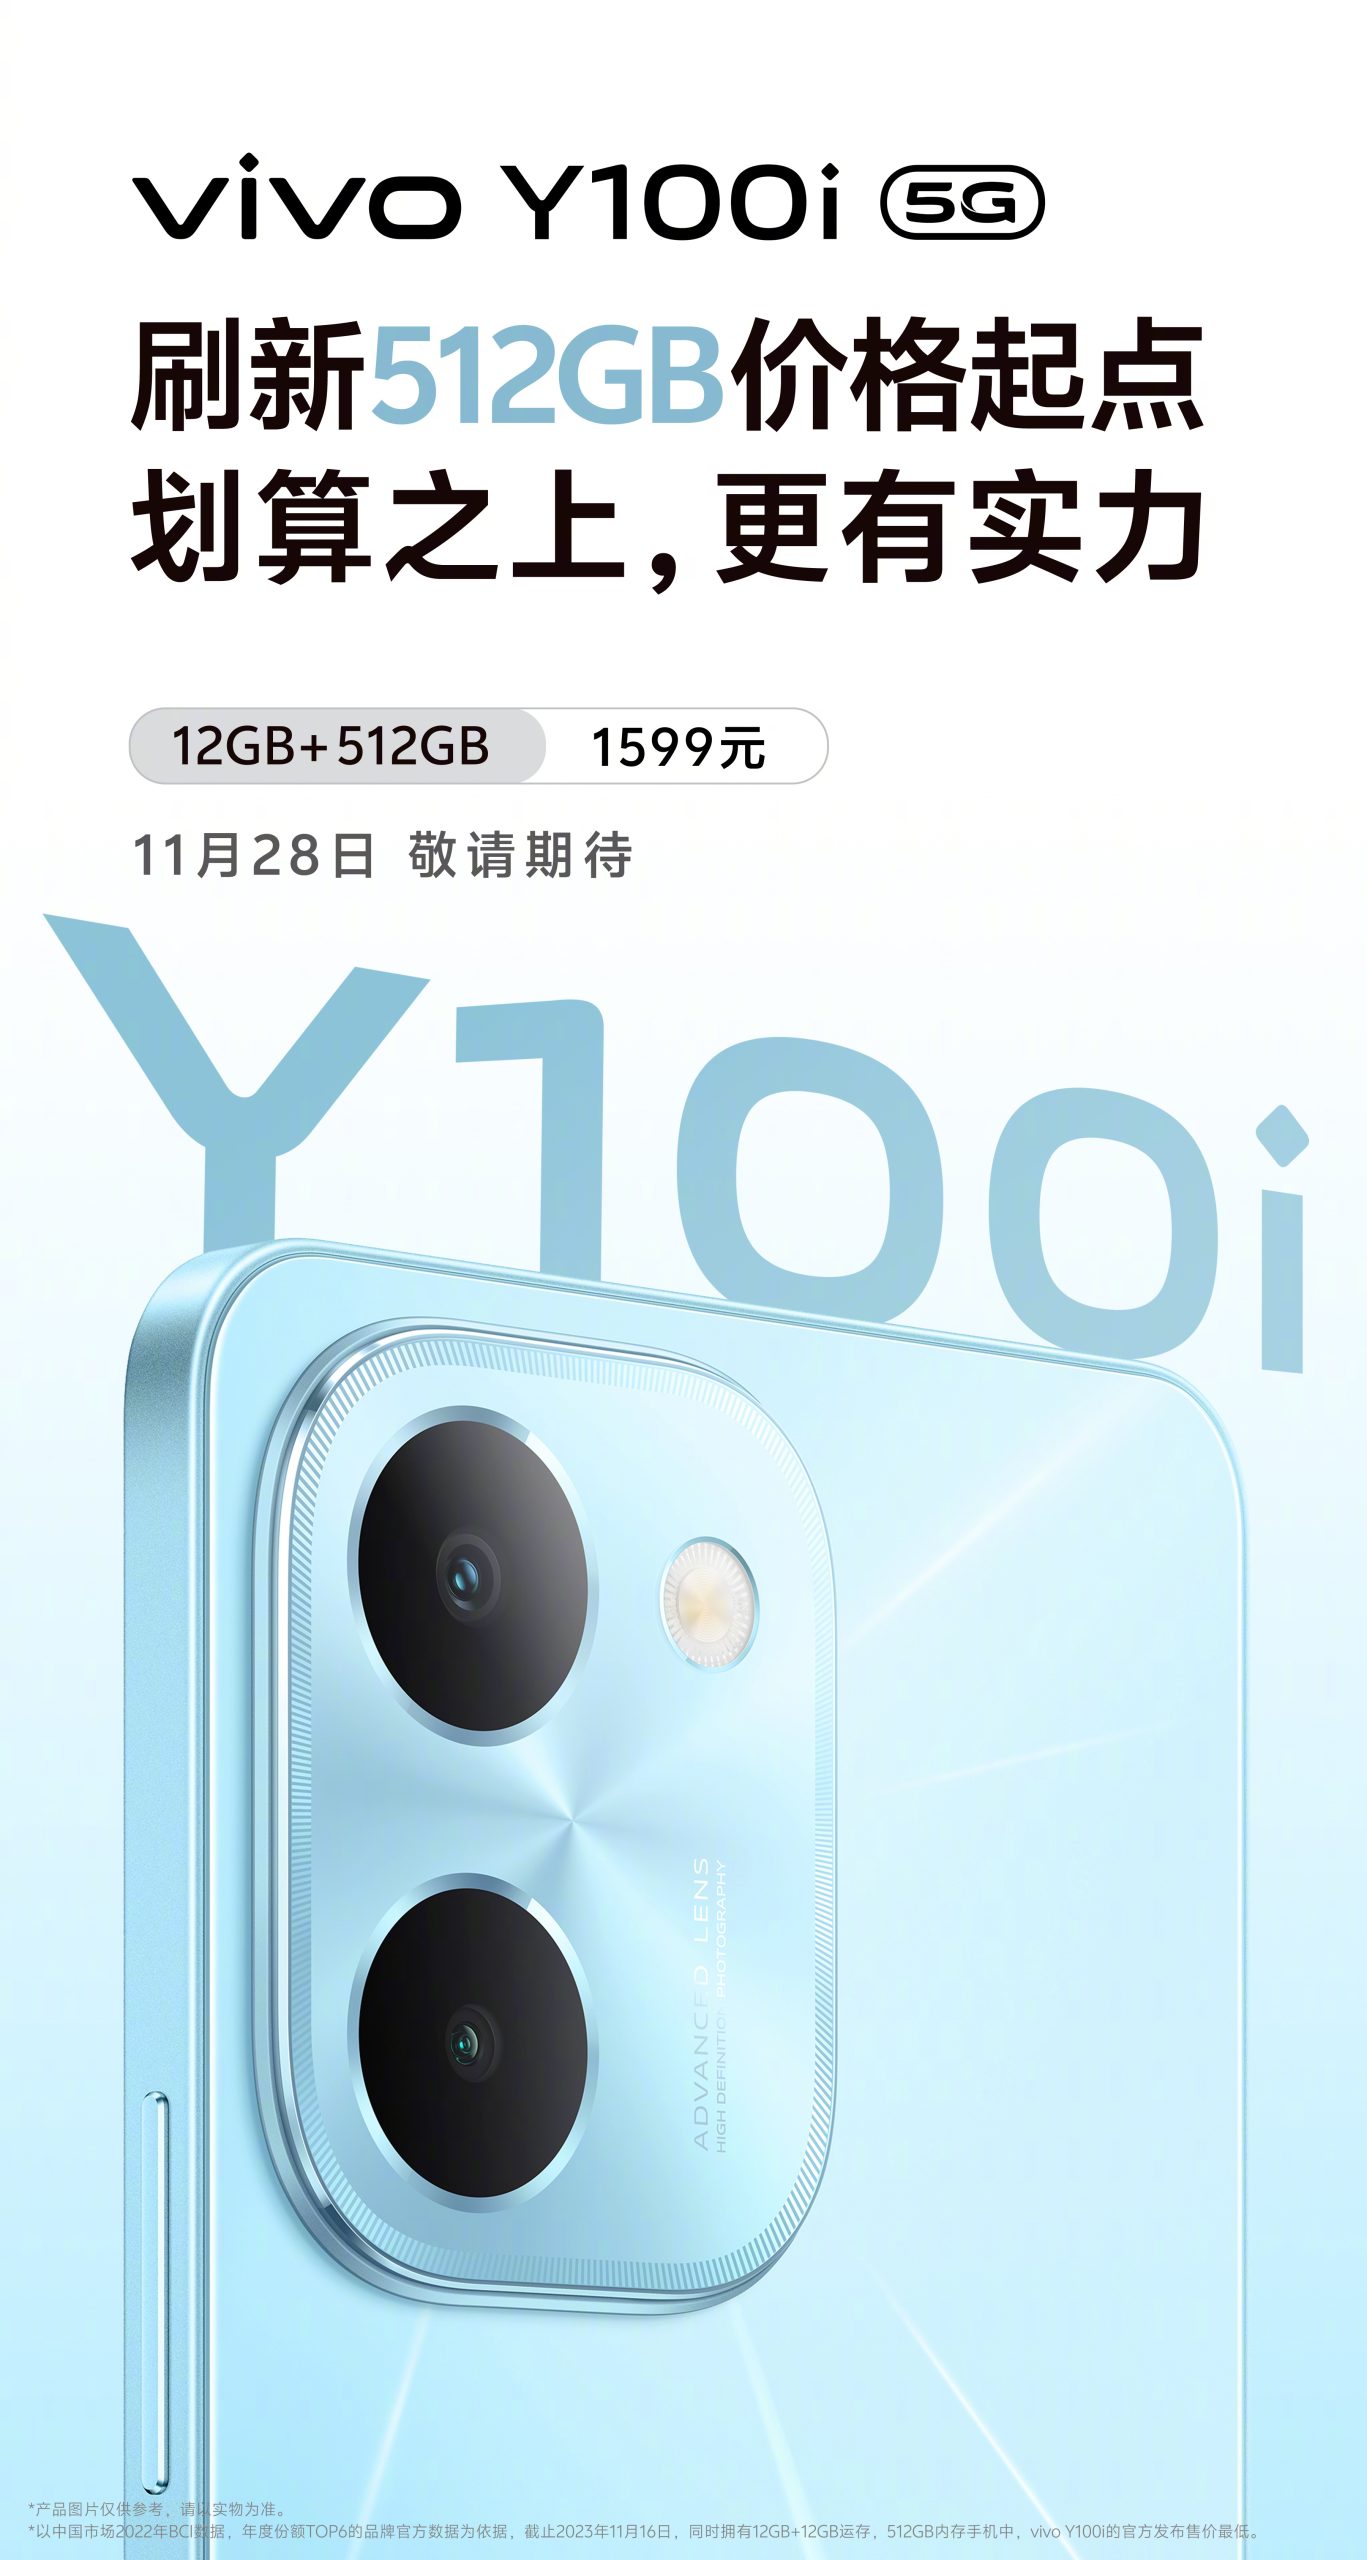 Vivo Y100i 5G launched